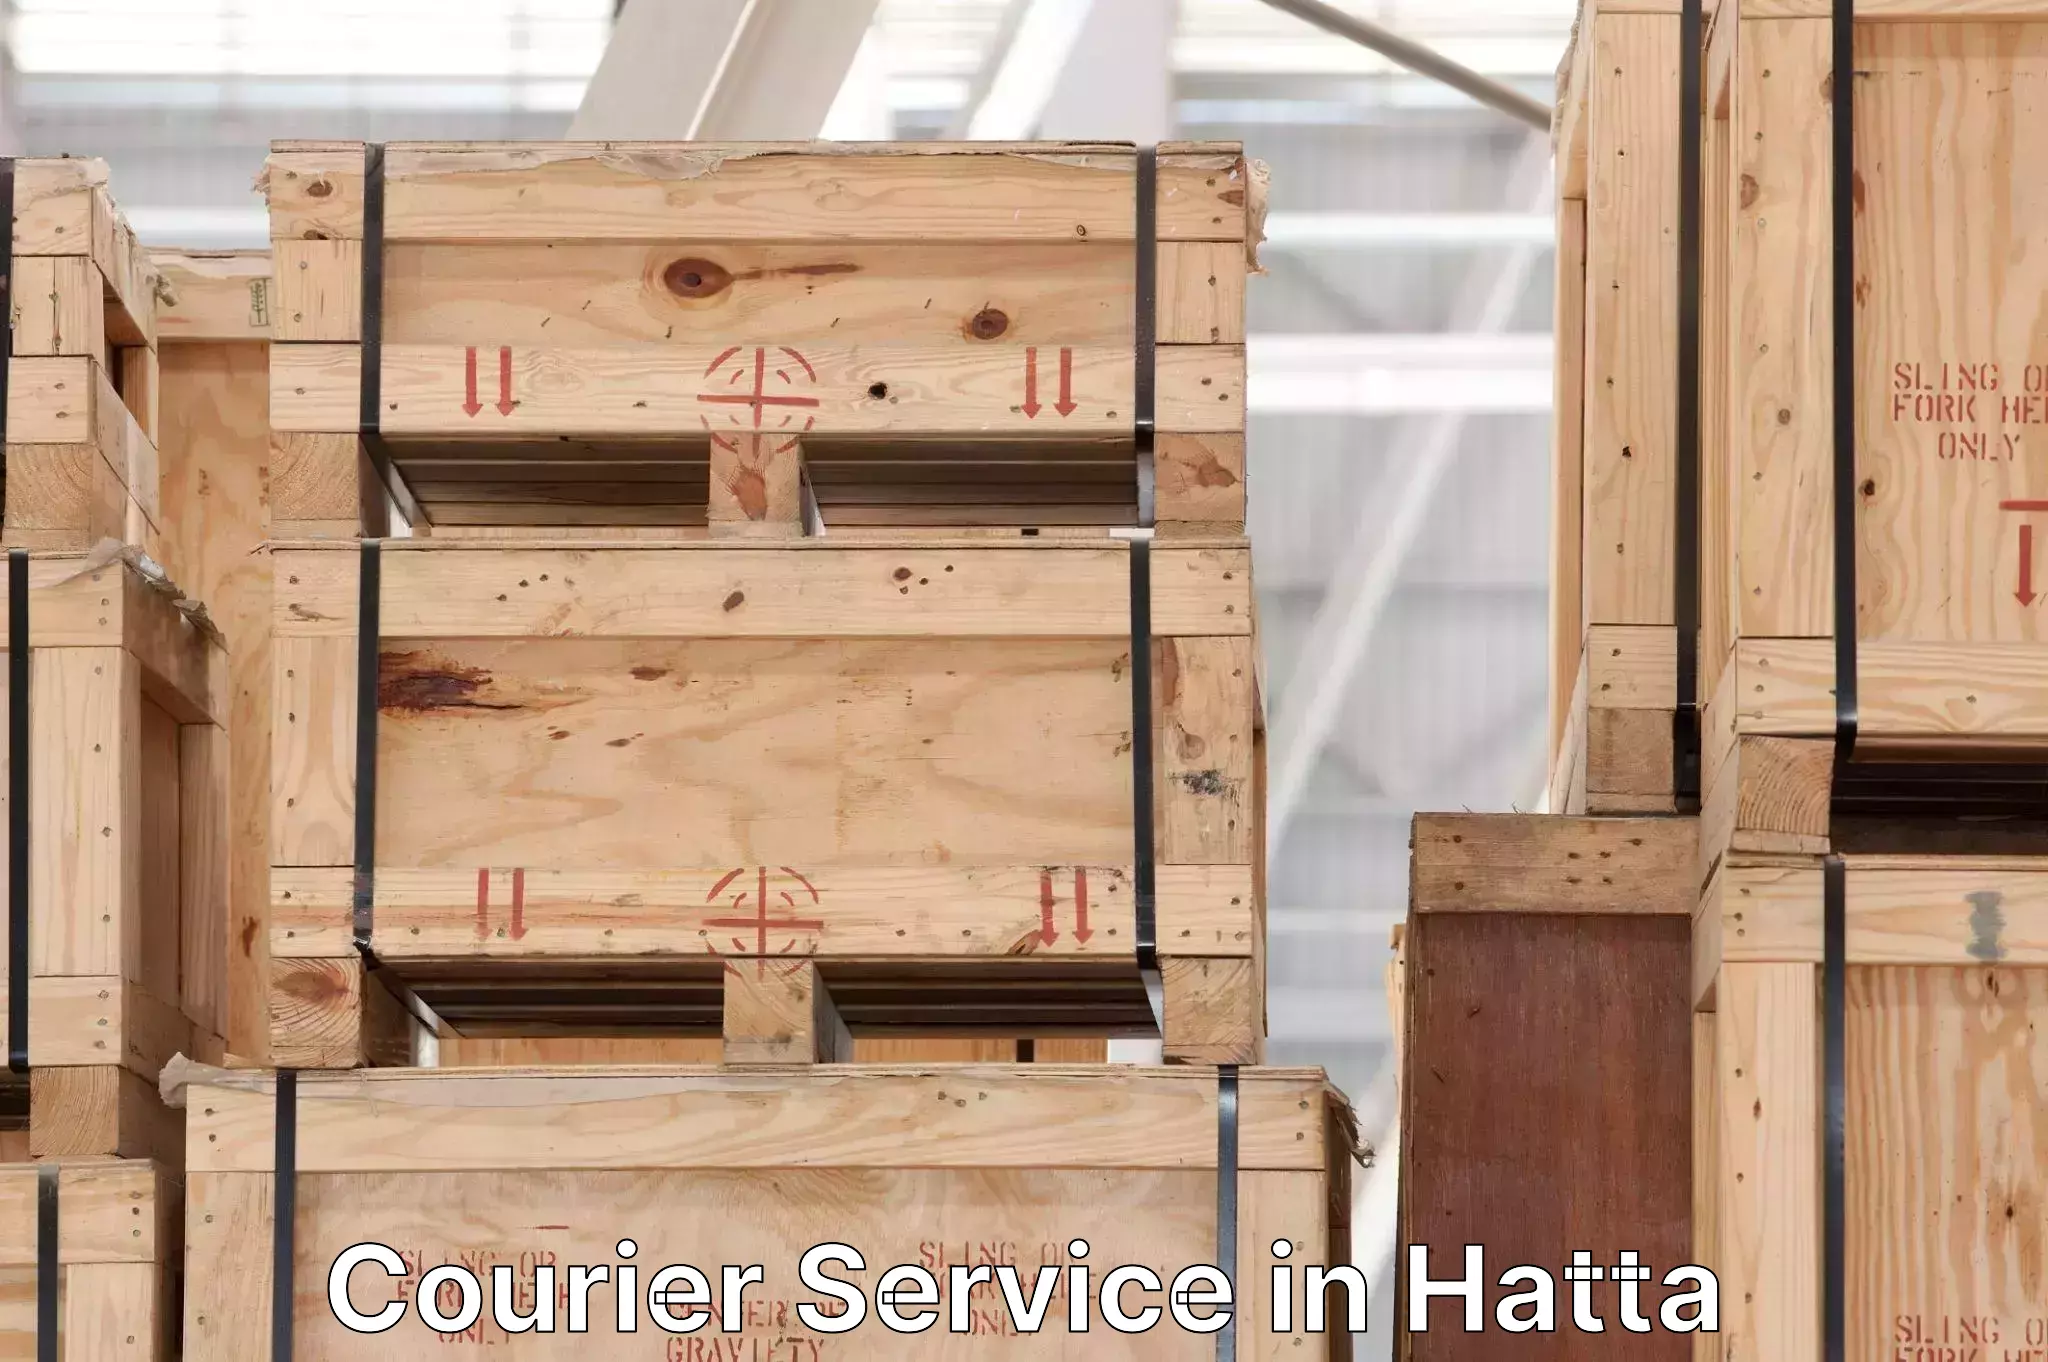 Express package transport in Hatta